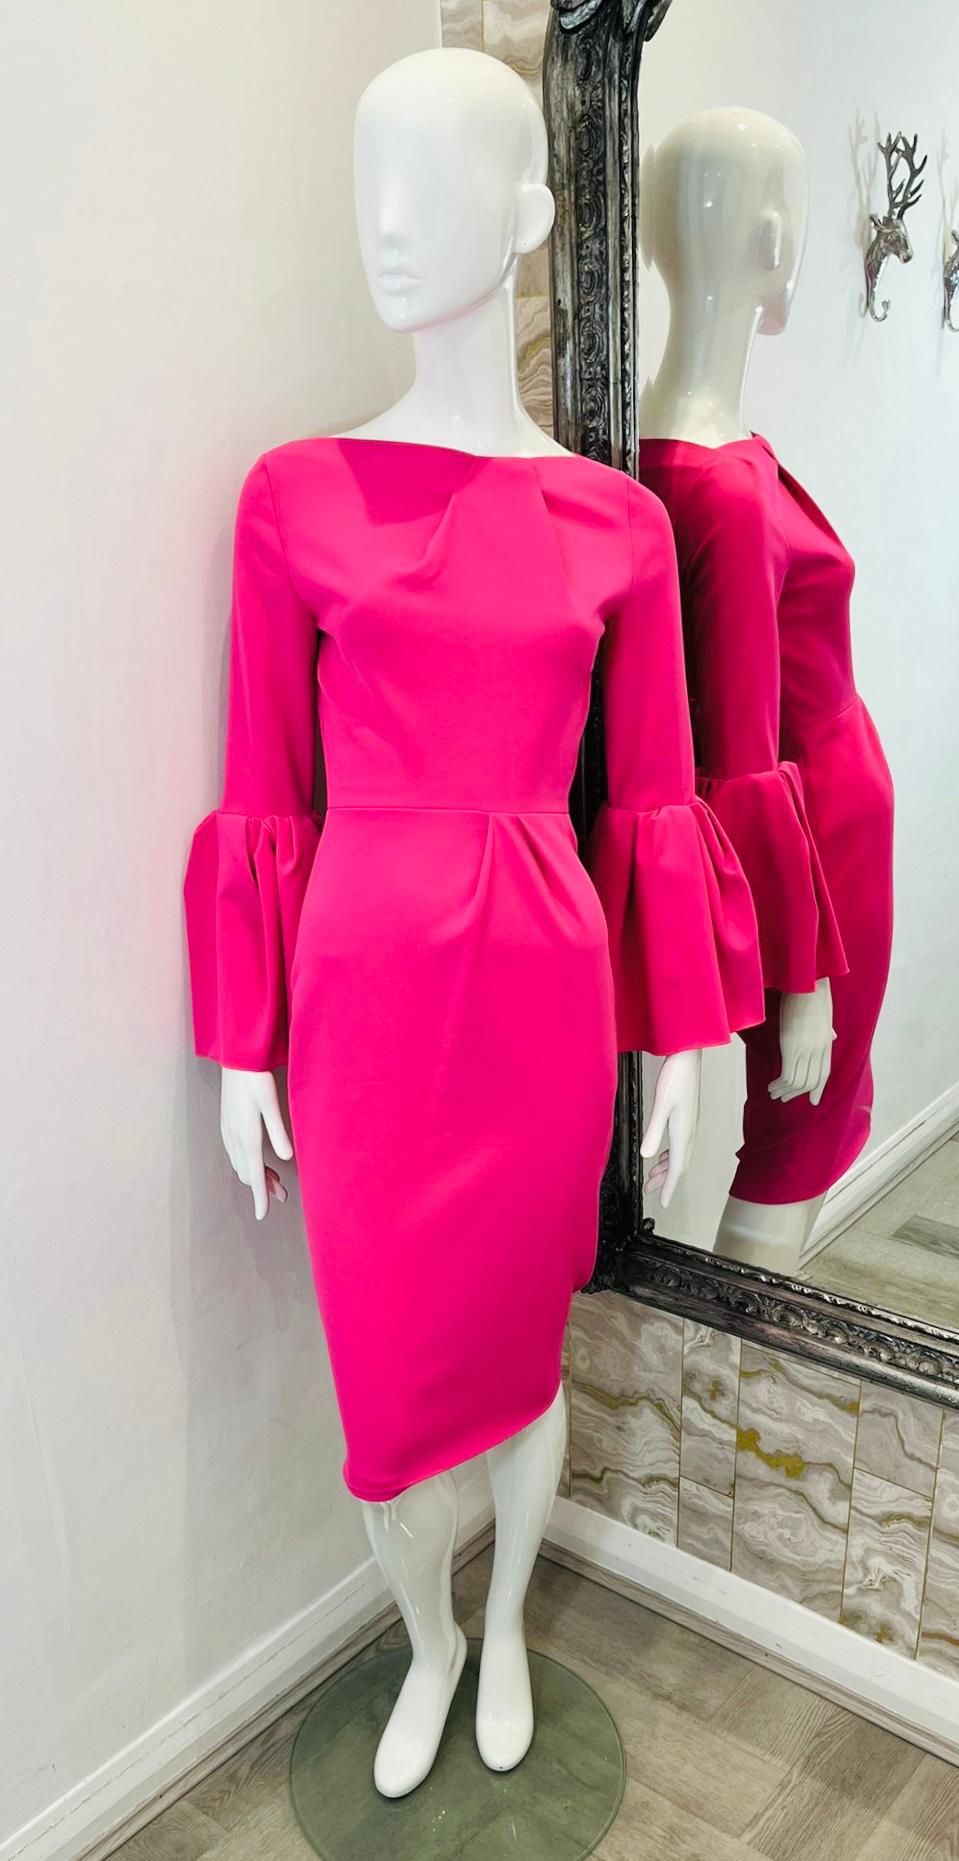 Roksanda Bell Sleeve Crepe Dress

Bright pink 'Margot' dress designed with long, bell sleeves and detailed with asymmetric drapes and pleats to the neckline and waist.

Featuring pencil, midi skirt and boat neck, styled with black zip fastening